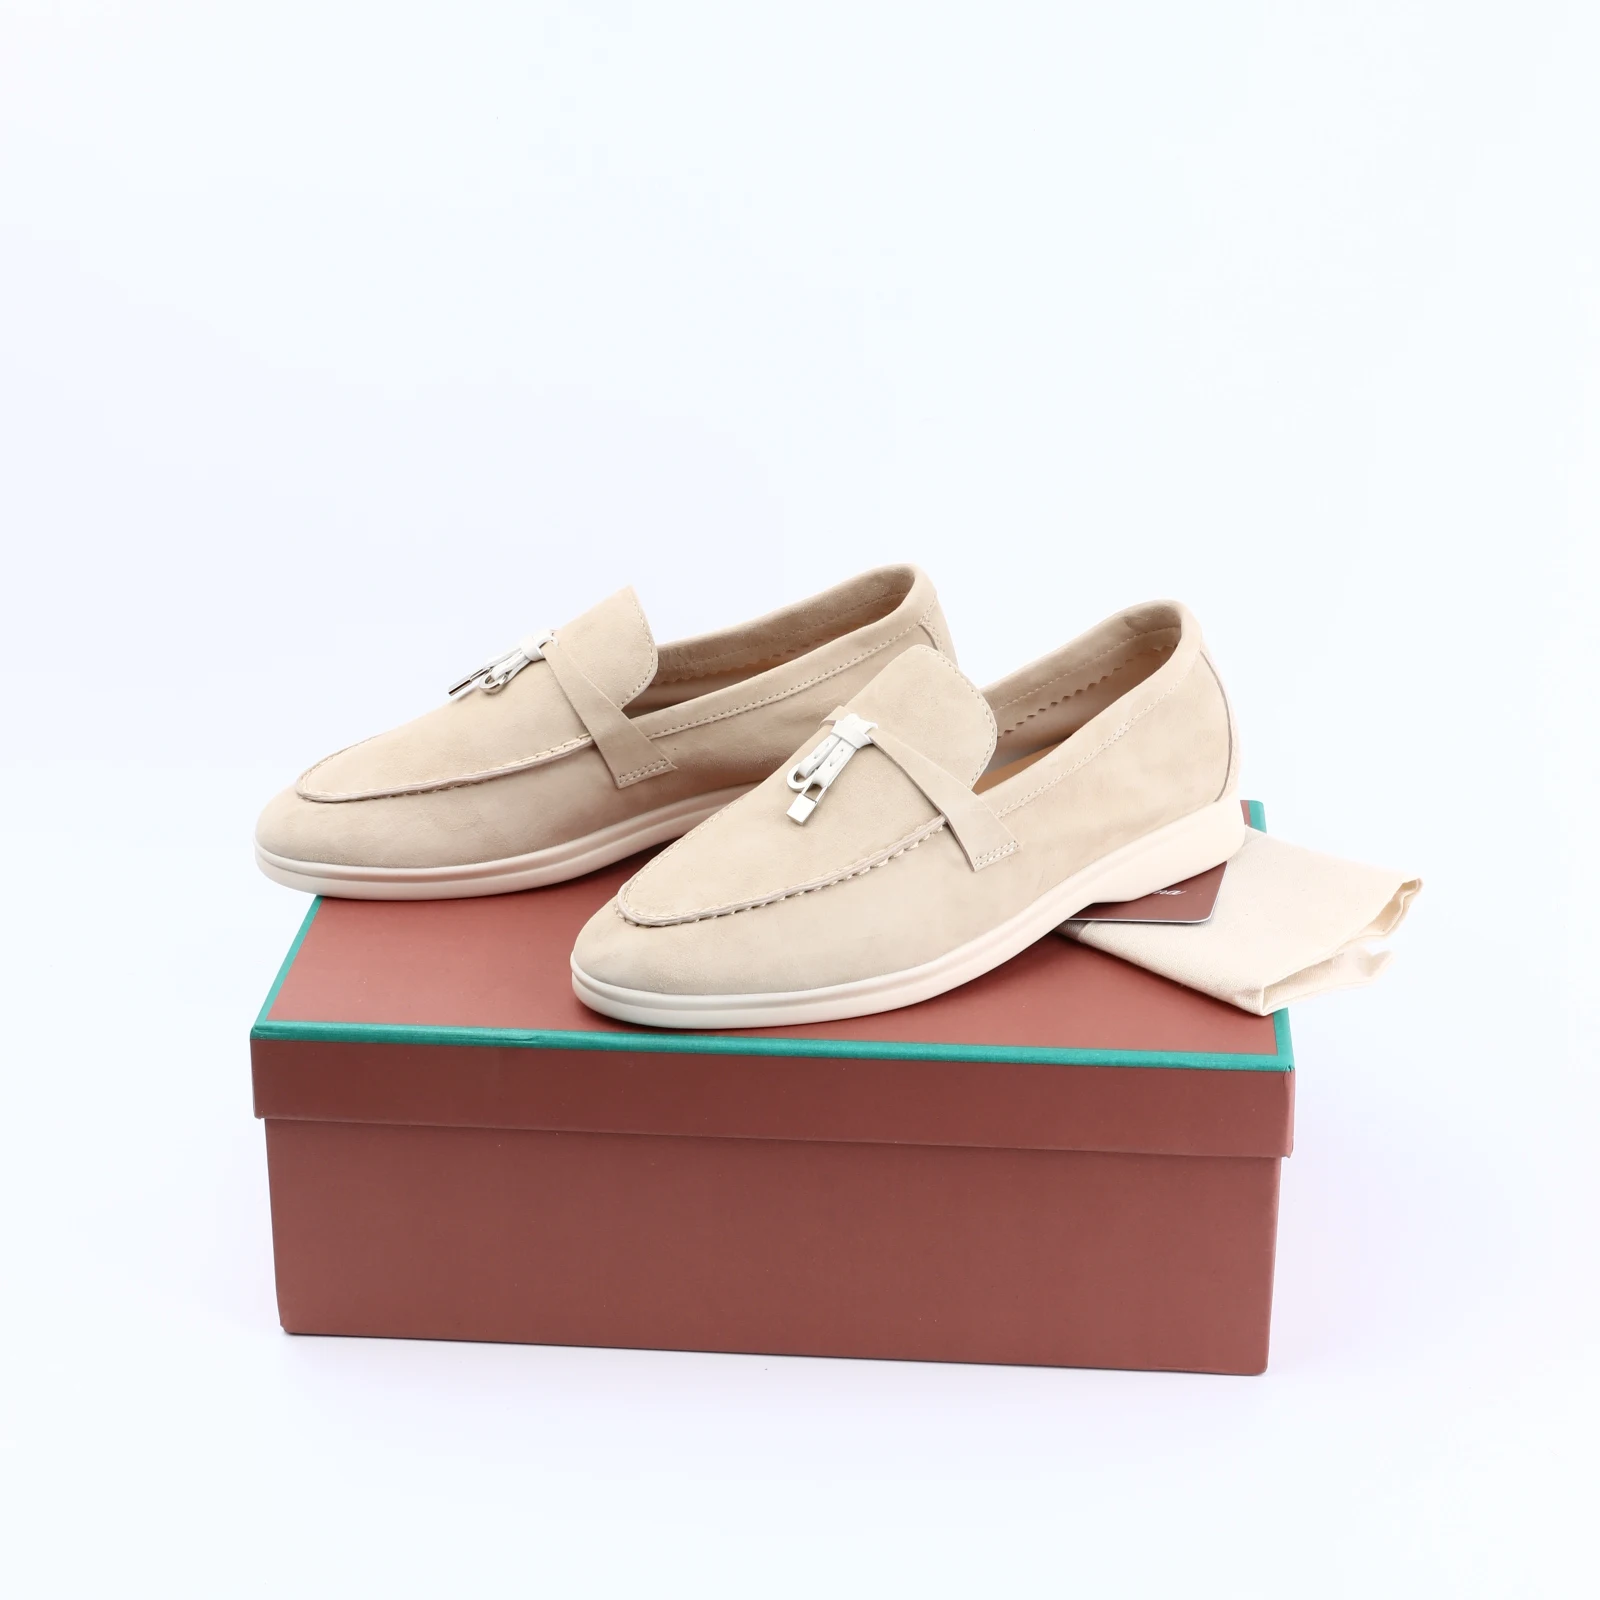 Moccasines Suede Loafers Summer Walk Shoes Women Spring Autumn Fashion Causal Le - $146.21